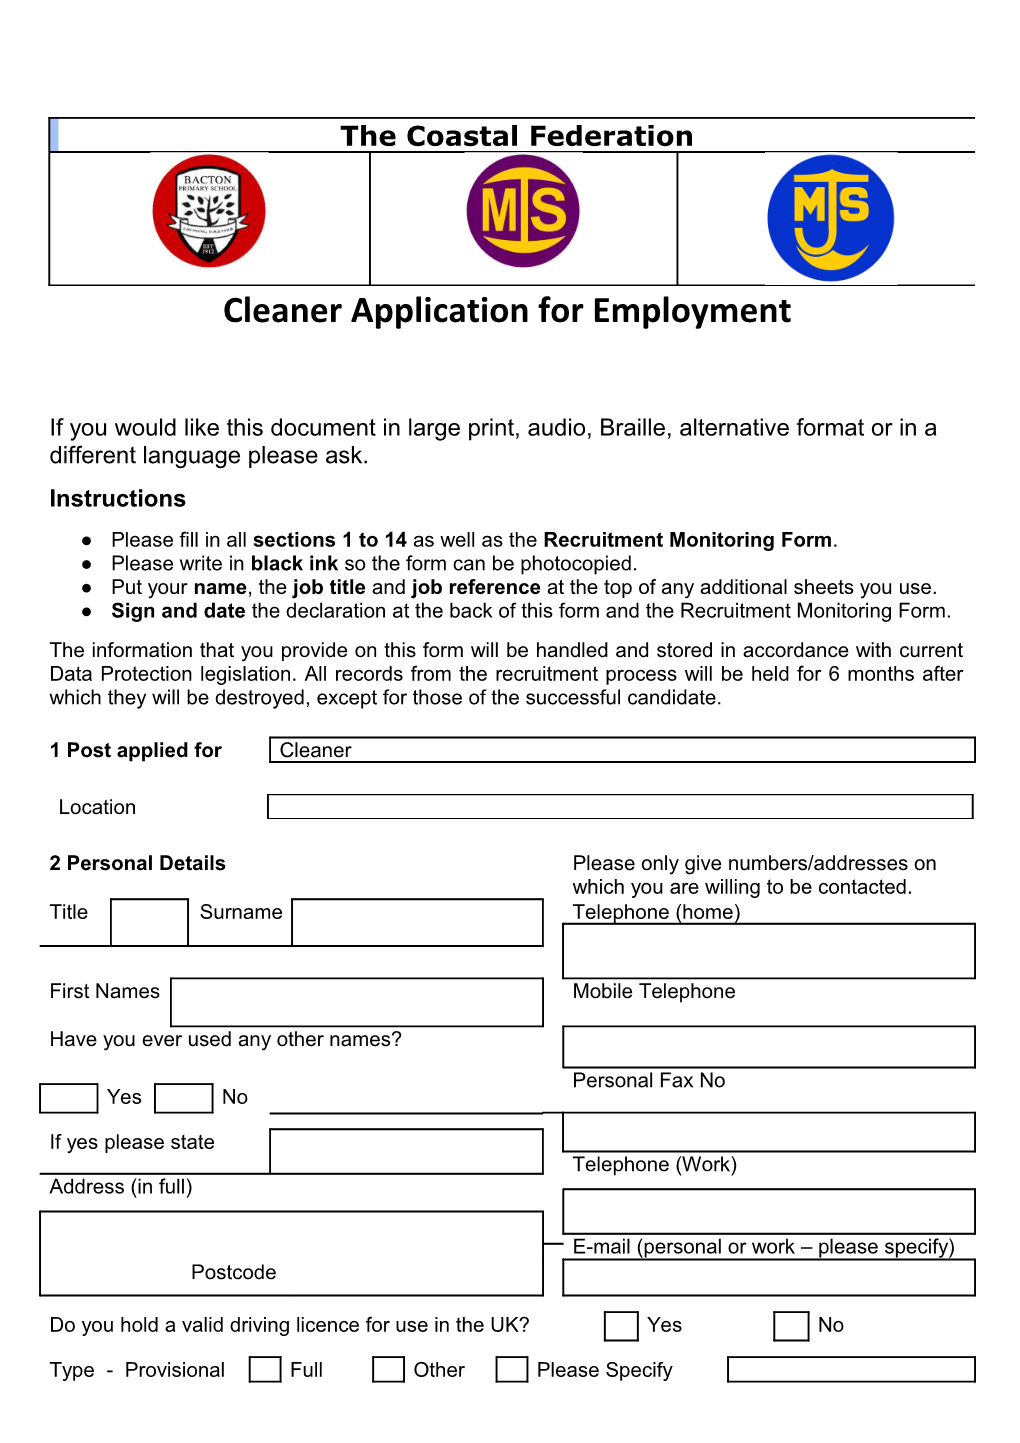 Cleaner Application for Employment